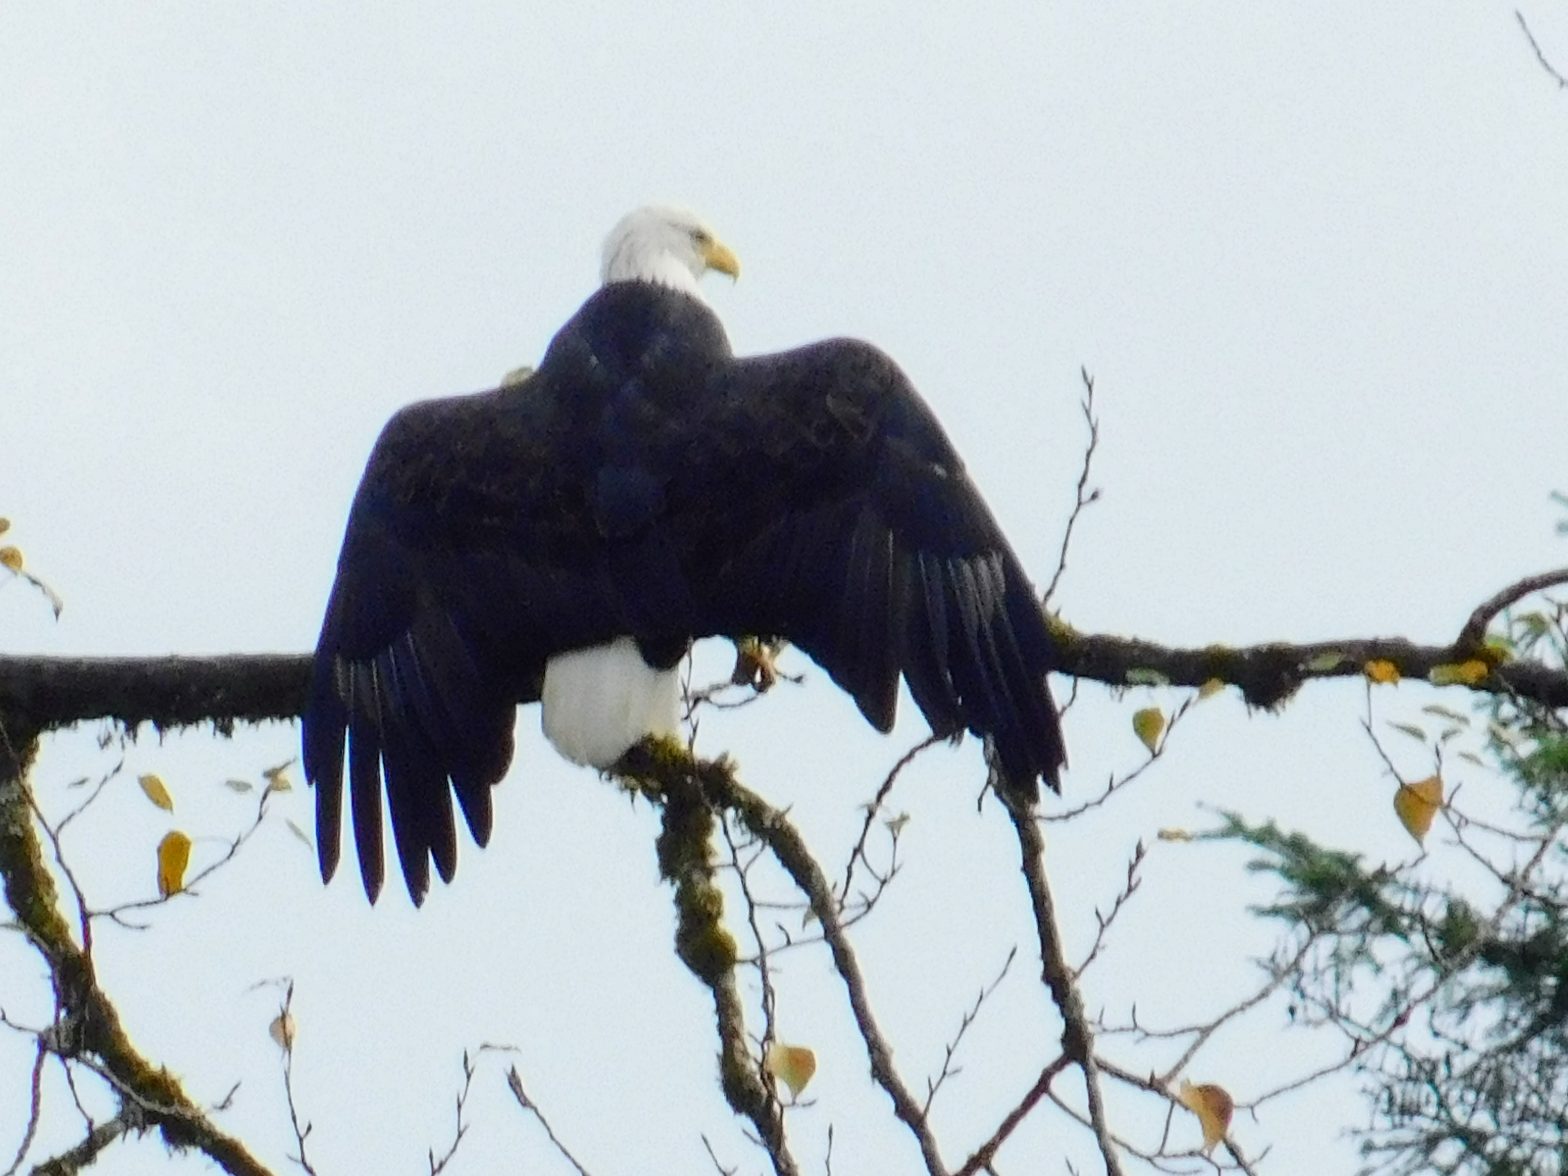 Did you know that eagles come back to the same nest year after year? Enjoy stunning photographs of our New Hampshire eagles and find tips for Earth Day activities for birders and anyone else. The truth about eagle watching and how boring it can be. Until it isn’t. Celebrage Earth Day and let eagles motivate you to pick up trash, plogging, think globally, act locally. Make your world a better place. #OurCarpeDiem #EarthDay #travel #NewHampshire #birding #eagles #plogging